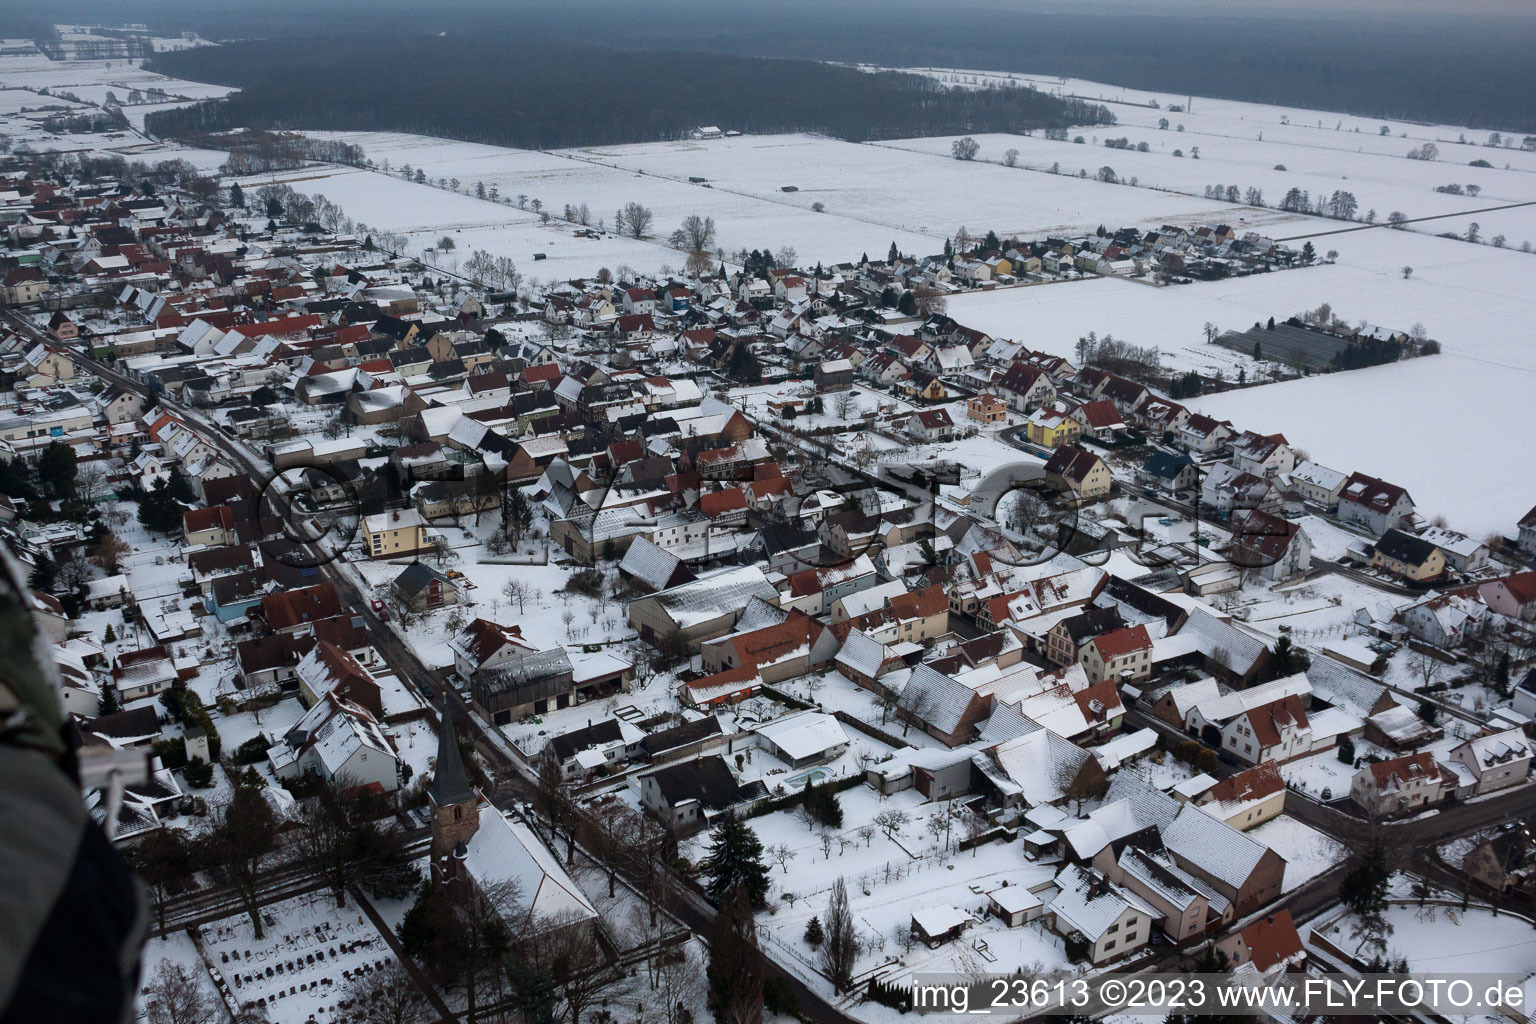 Drone image of Freckenfeld in the state Rhineland-Palatinate, Germany